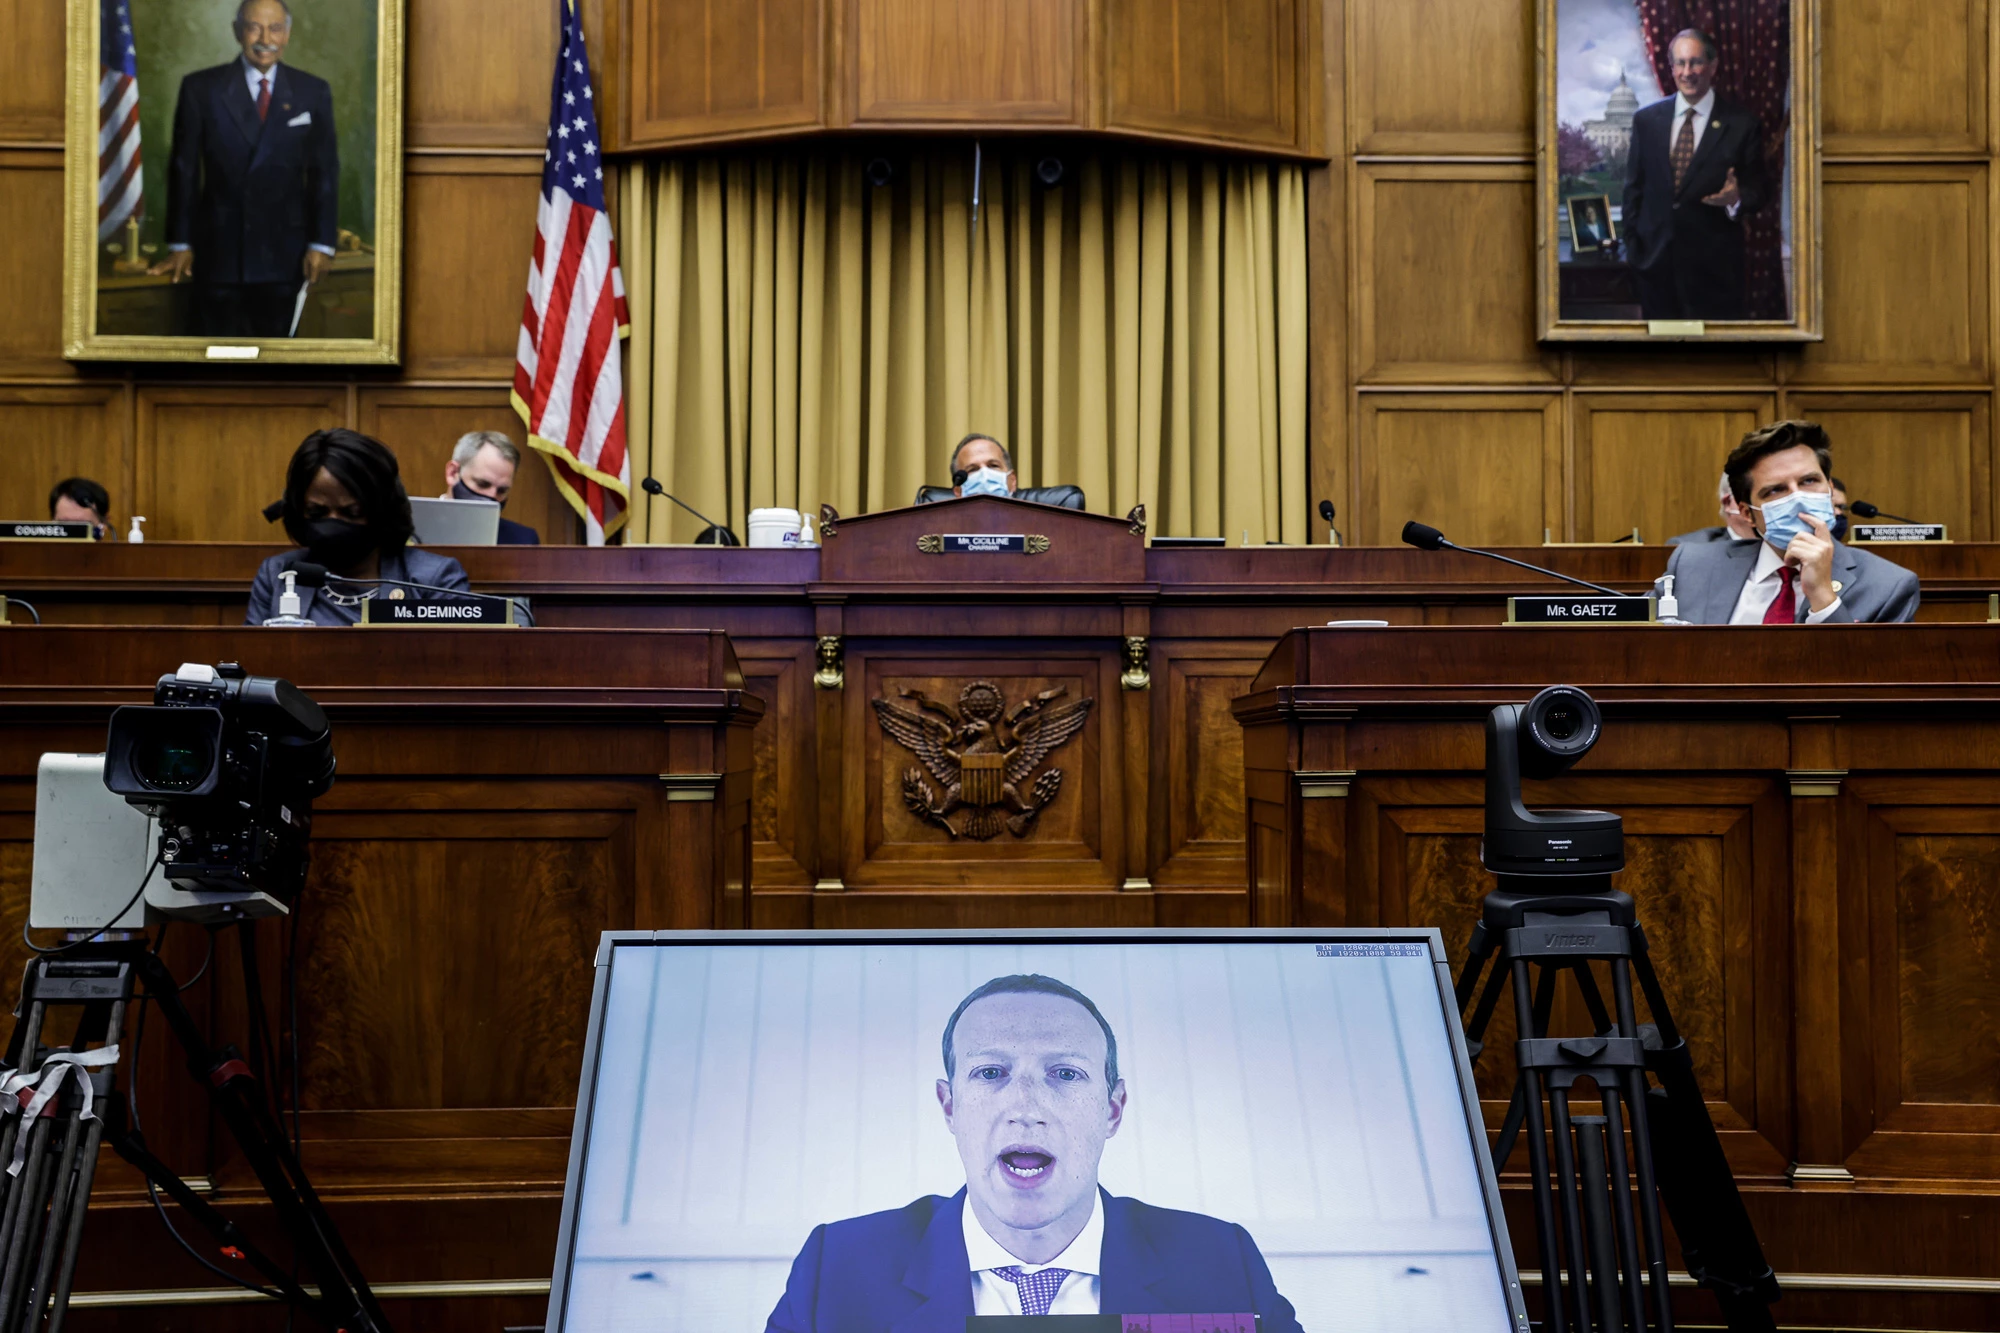 WASHINGTON, DC - JULY 29: Facebook CEO Mark Zuckerberg speaks via video conference during the House Judiciary Subcommittee on Antitrust, Commercial and Administrative Law hearing on Online Platforms and Market Power in the Rayburn House office Building, July 29, 2020 on Capitol Hill in Washington, DC. (Photo by Graeme Jennings-Pool/Getty Images)